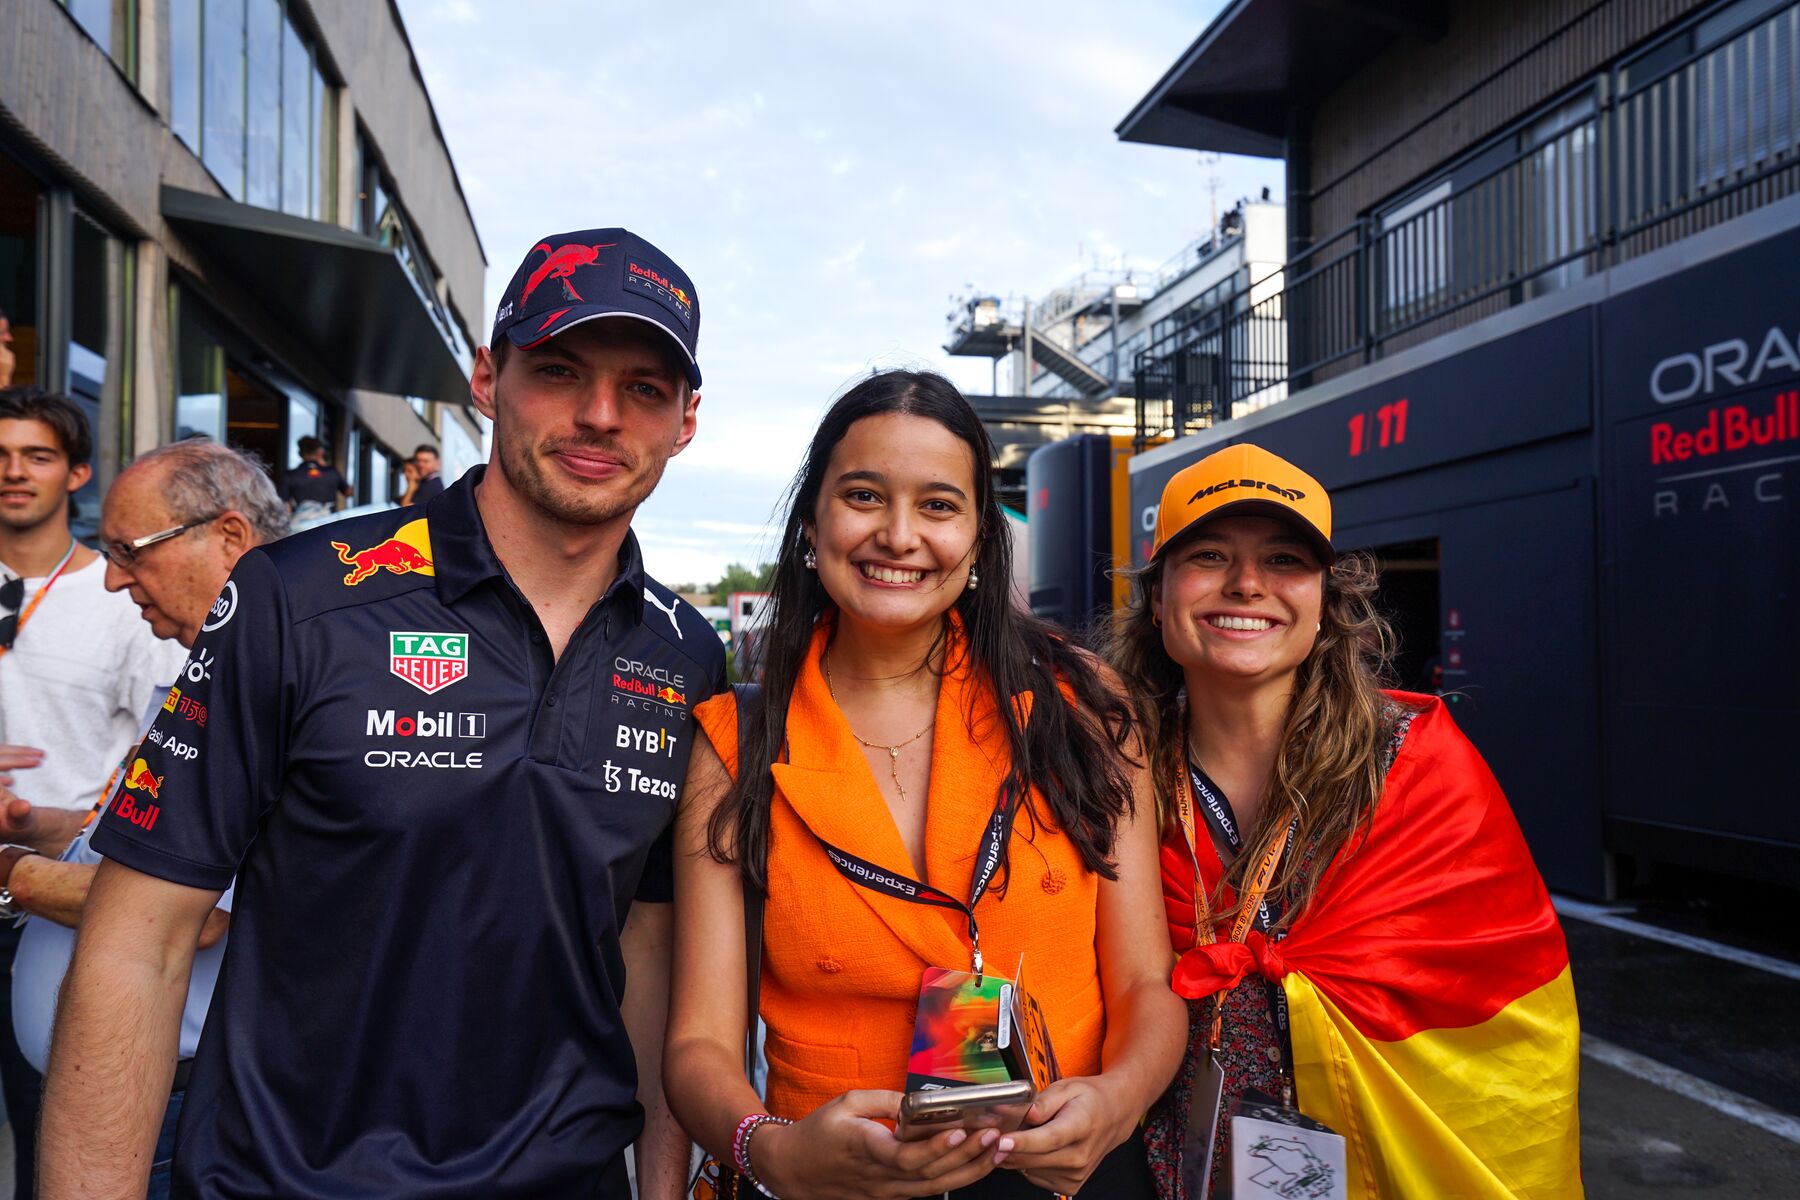 Max with the fans